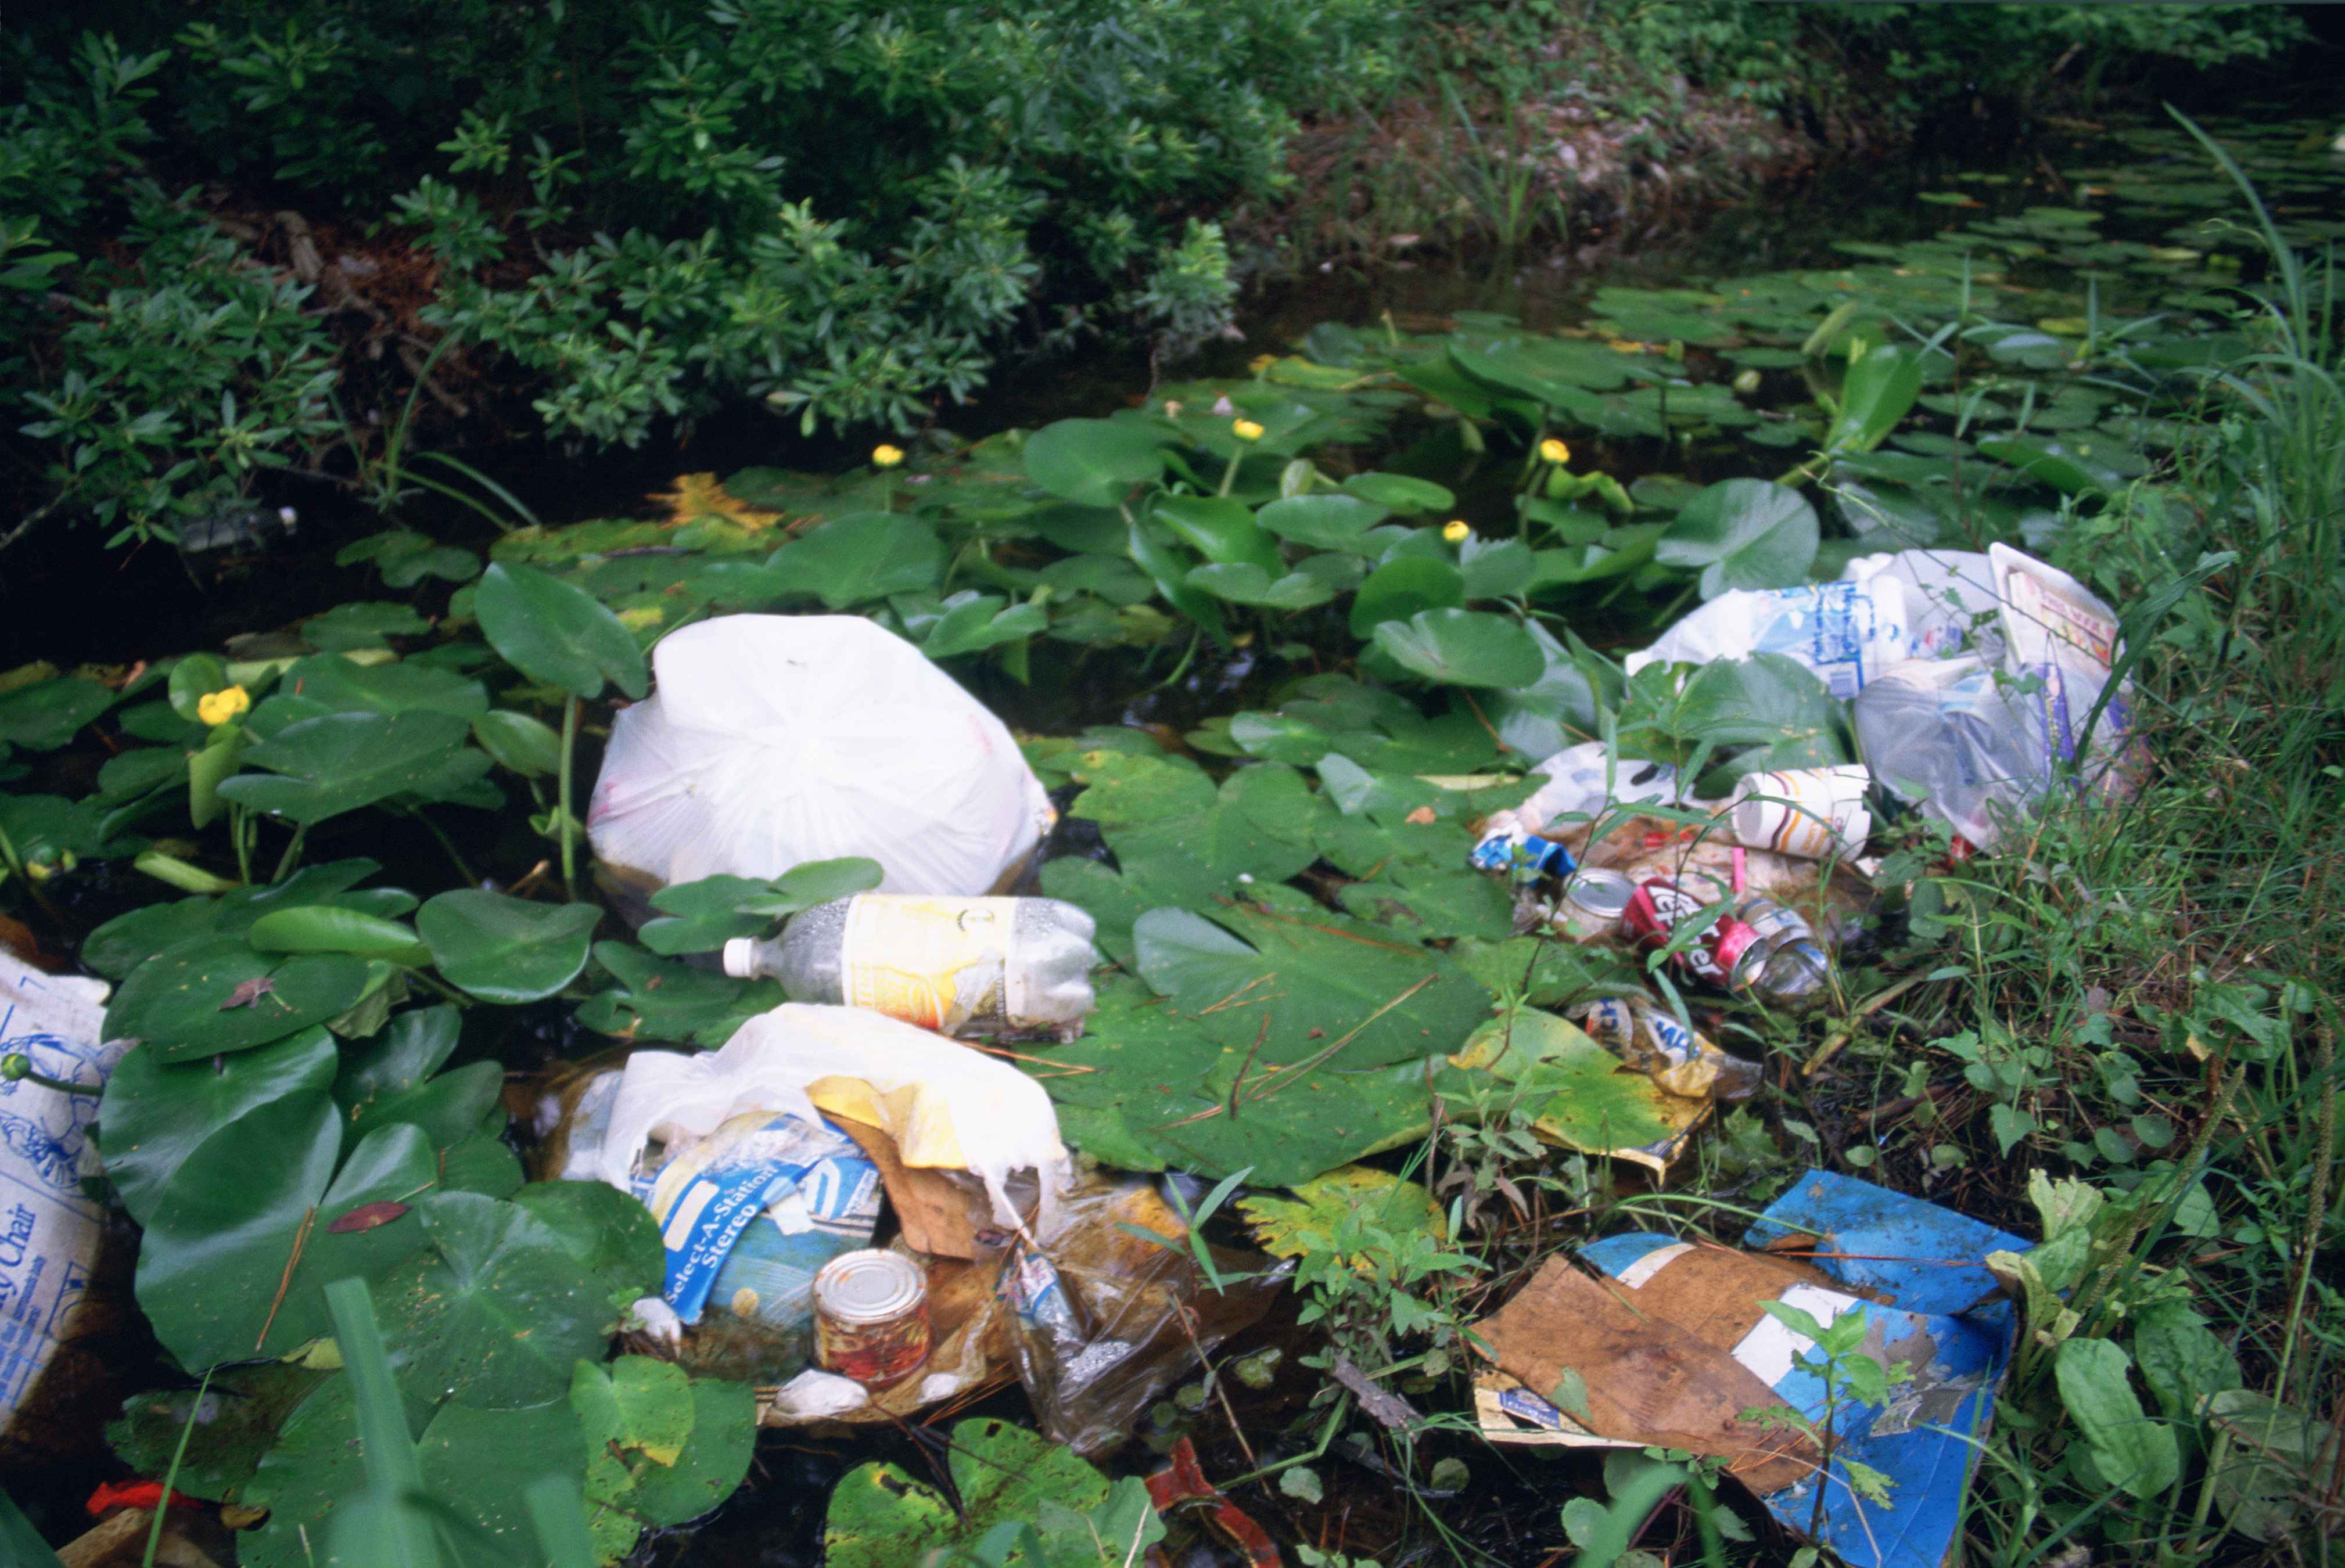 Free picture: litter, garbage, dumped, wetland area, water, lilies ...